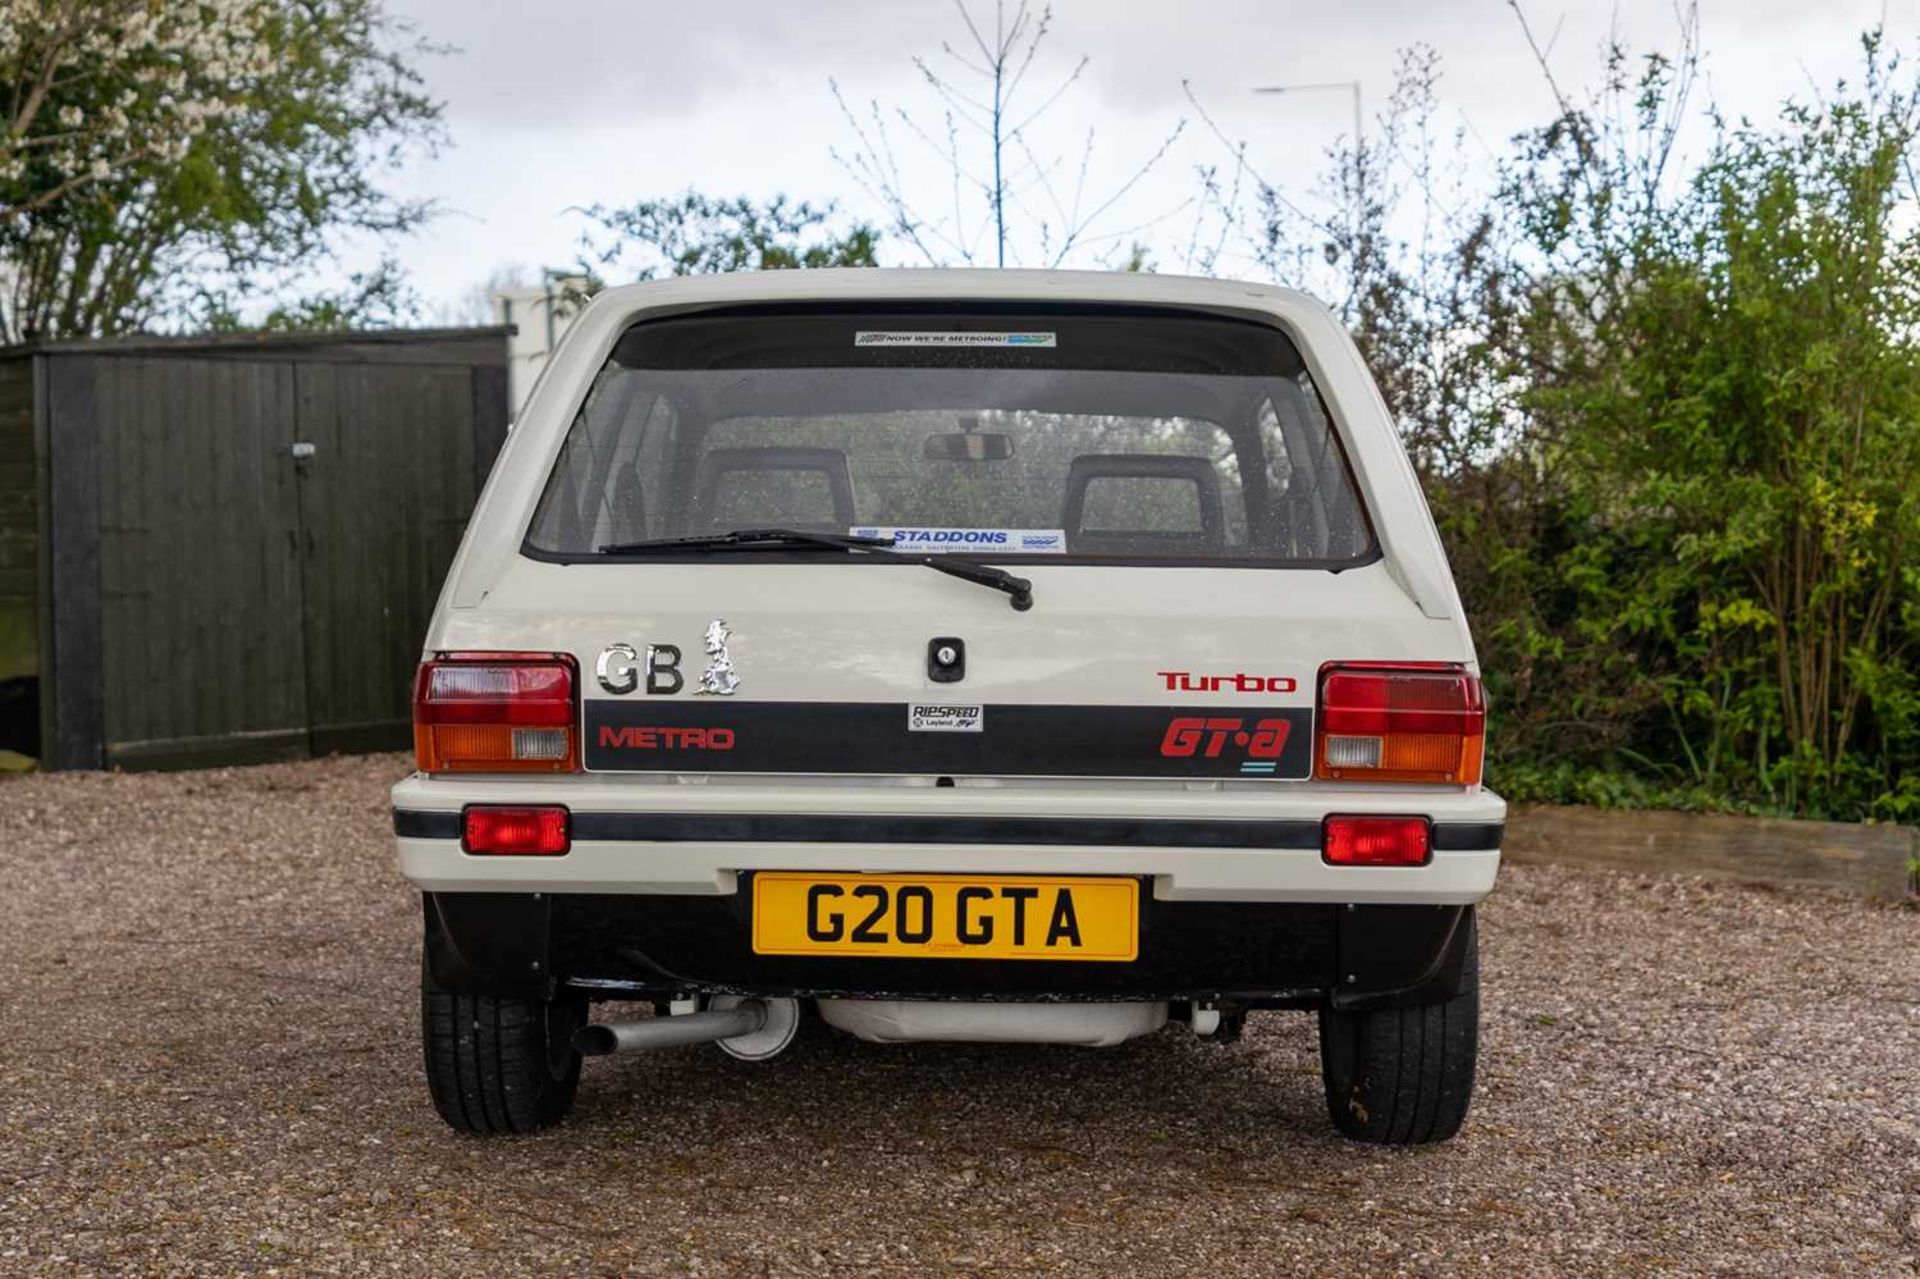 1989 Austin Metro GTa  Offered with the registration ‘G20 GTA’ and a fresh MOT - Image 8 of 53